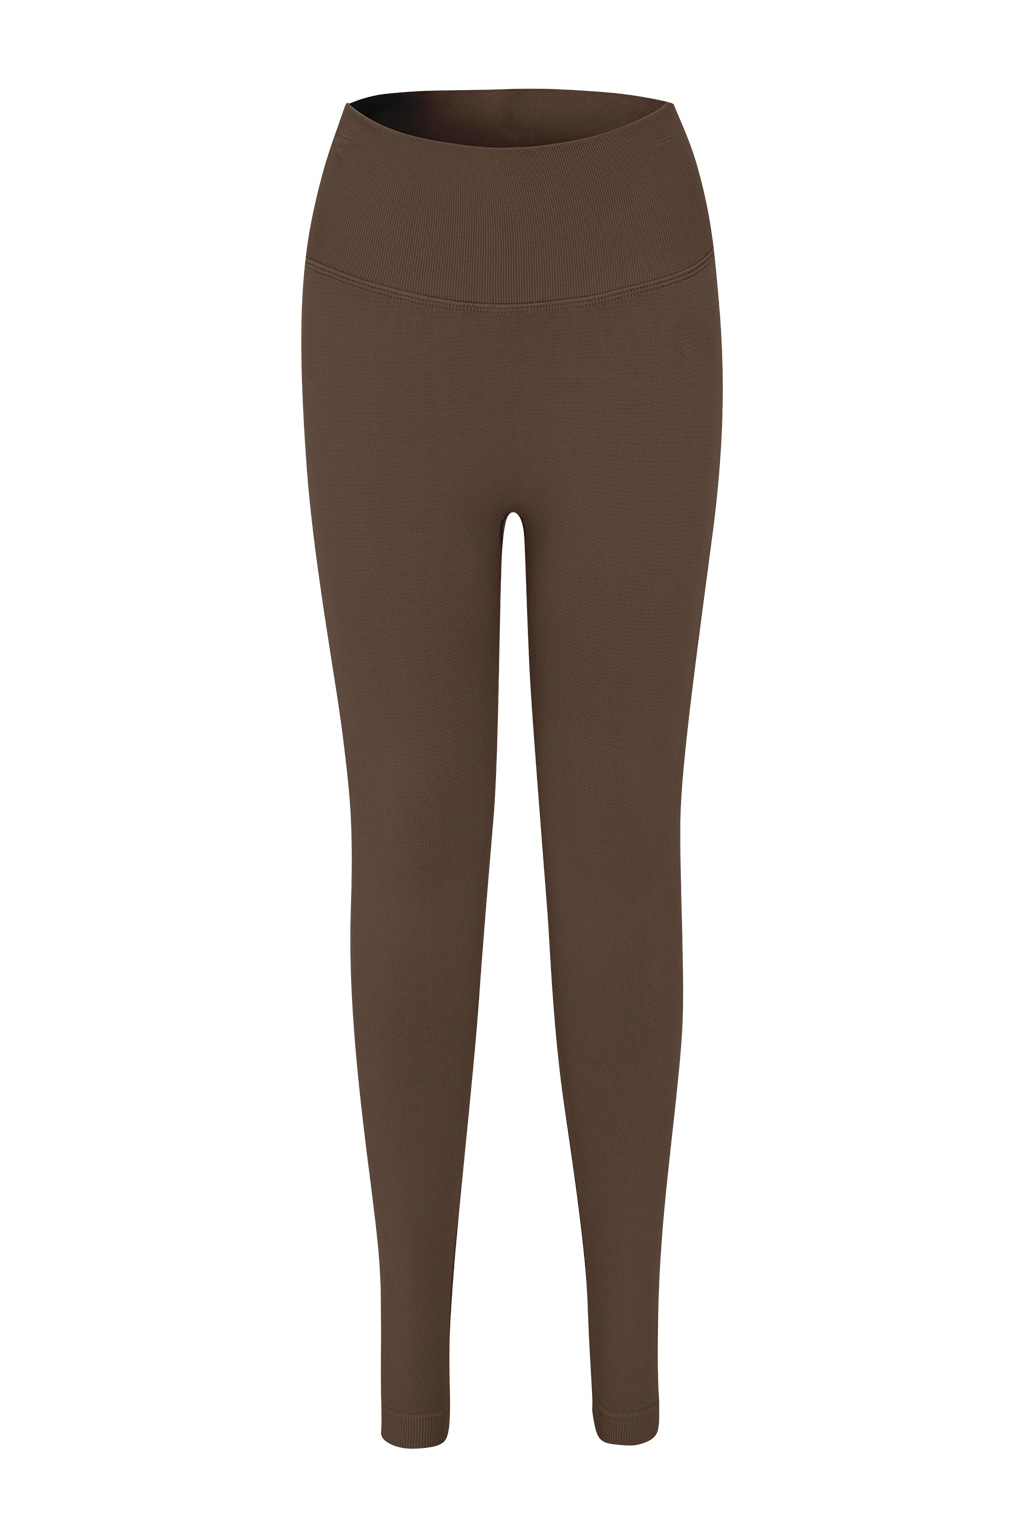 All Day Leggings Coffee Brown